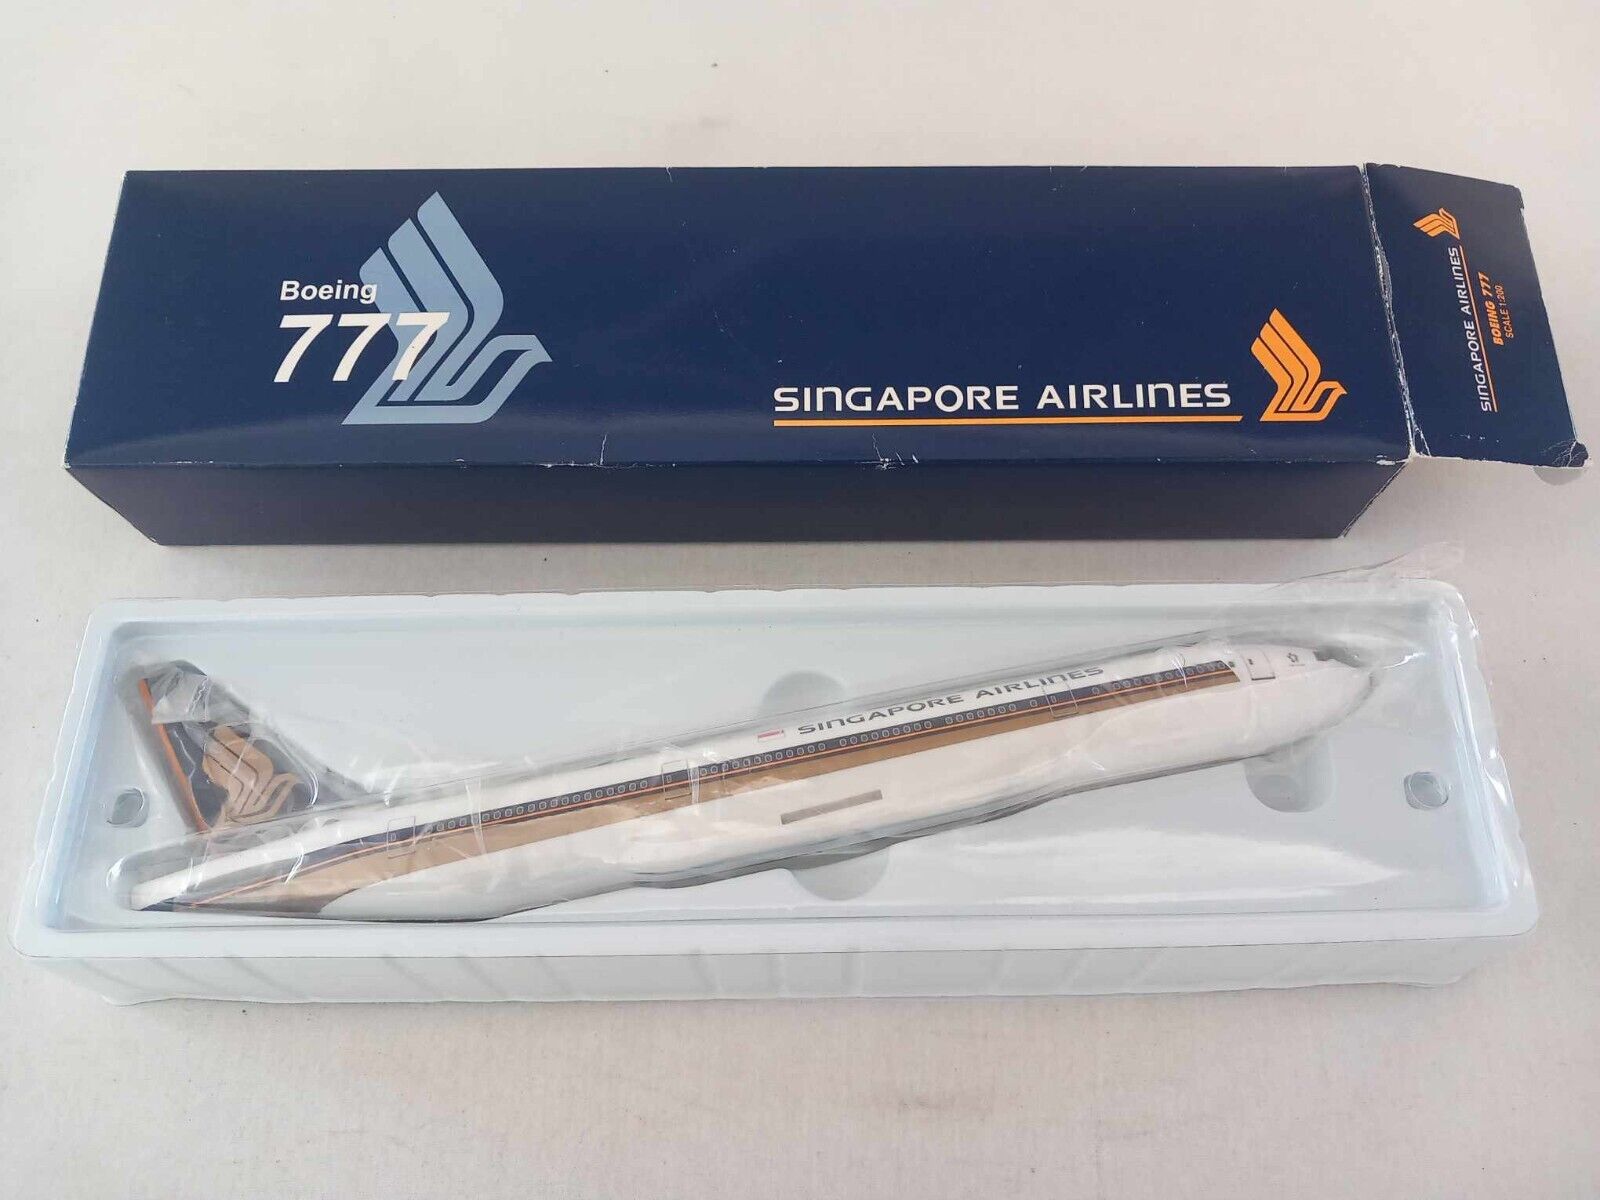 Singapore Airlines  Boeing 777 scale  1:200  aircraft plastic kit by Ever Rise